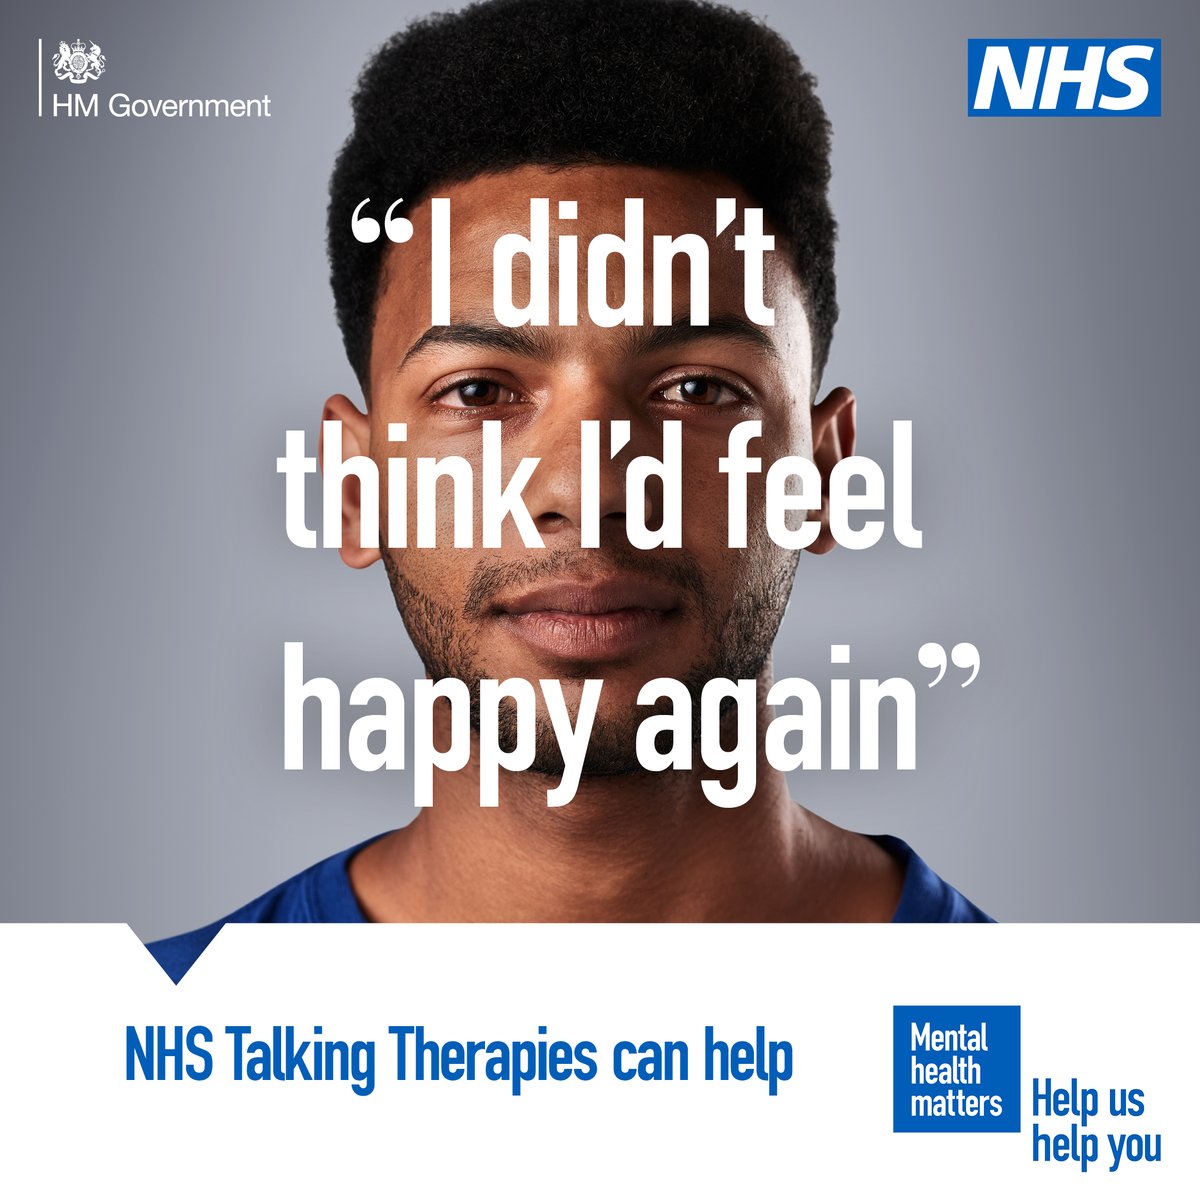 Struggling with feelings of depression, excessive worry, social anxiety, post-traumatic stress or obsessions and compulsions? NHS Talking Therapies can help. The service is effective, confidential and free. Your GP can refer you or refer yourself at nhs.uk/mental-health/…